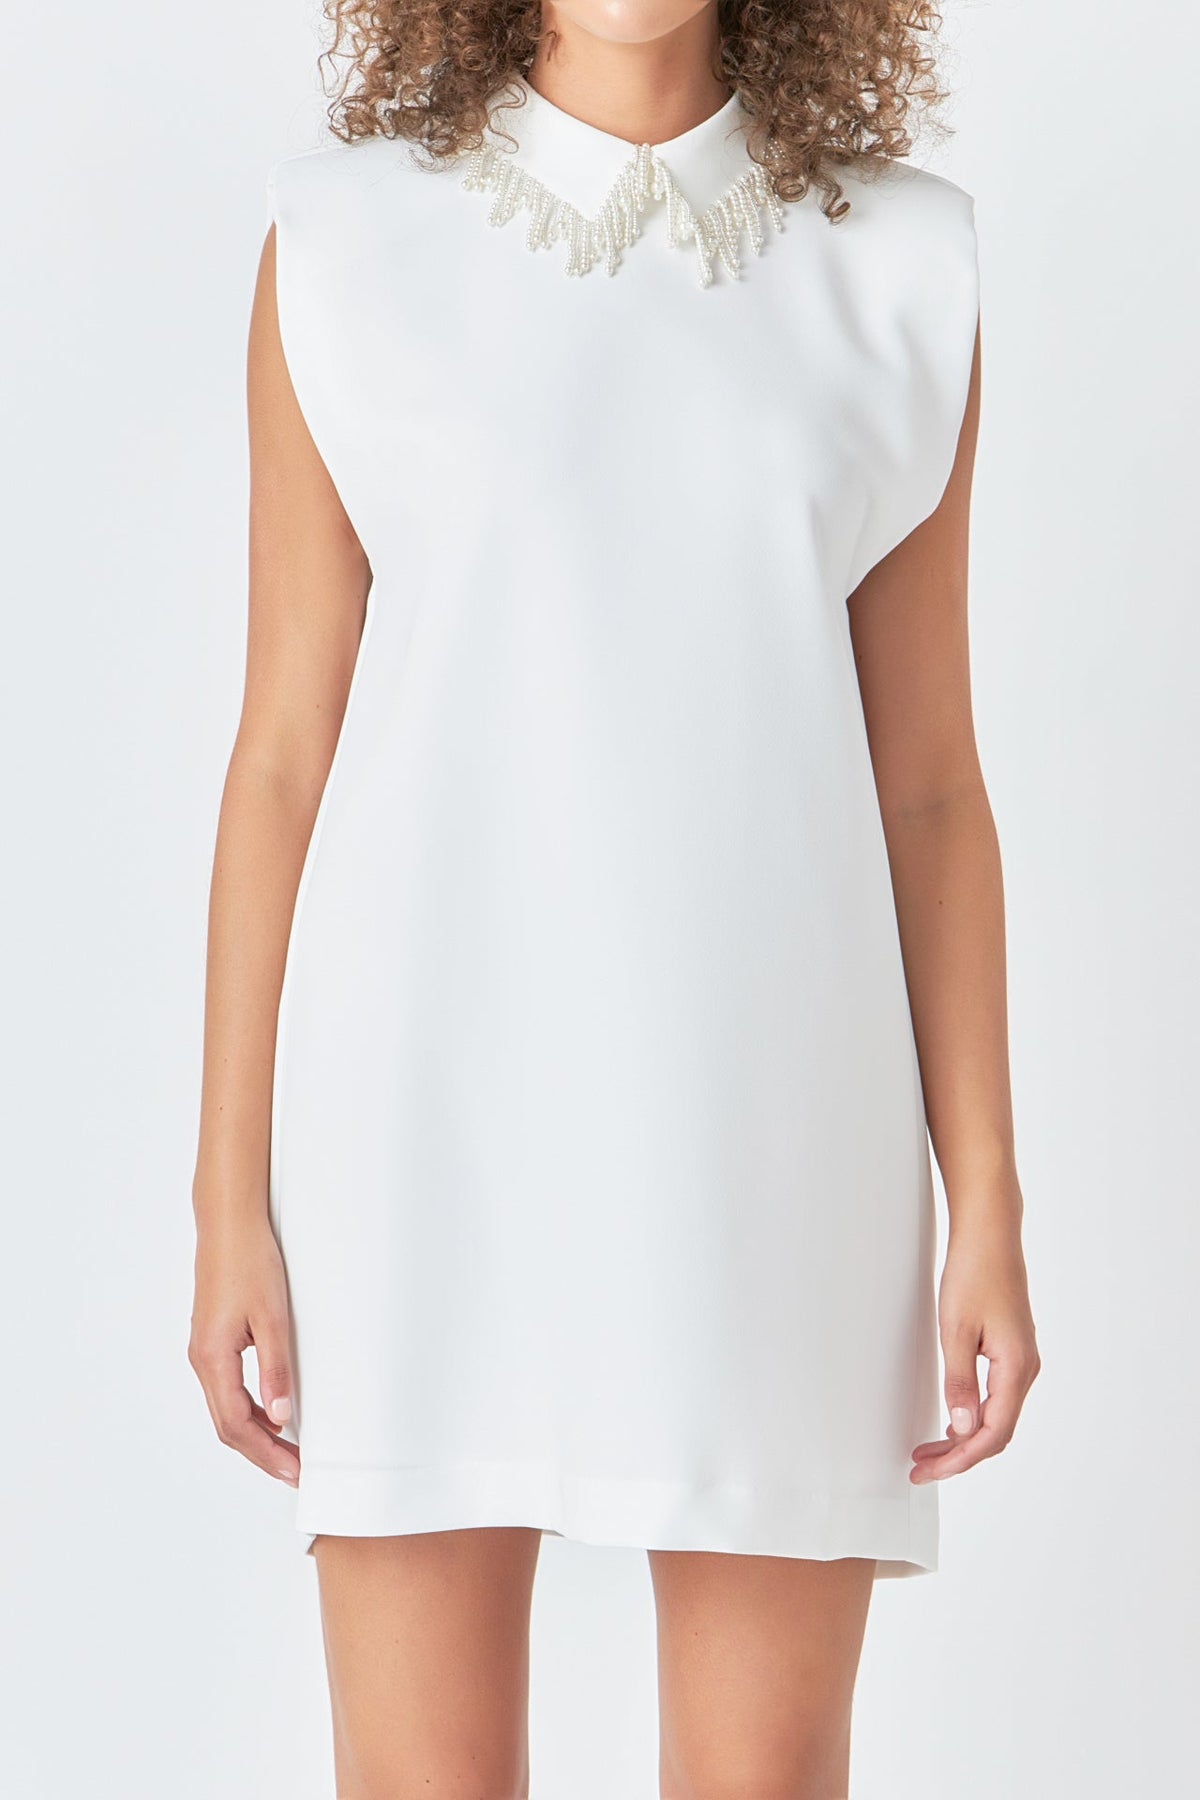 ENDLESS ROSE - Pearl Collar Sleeveless Mini Dress - DRESSES available at Objectrare